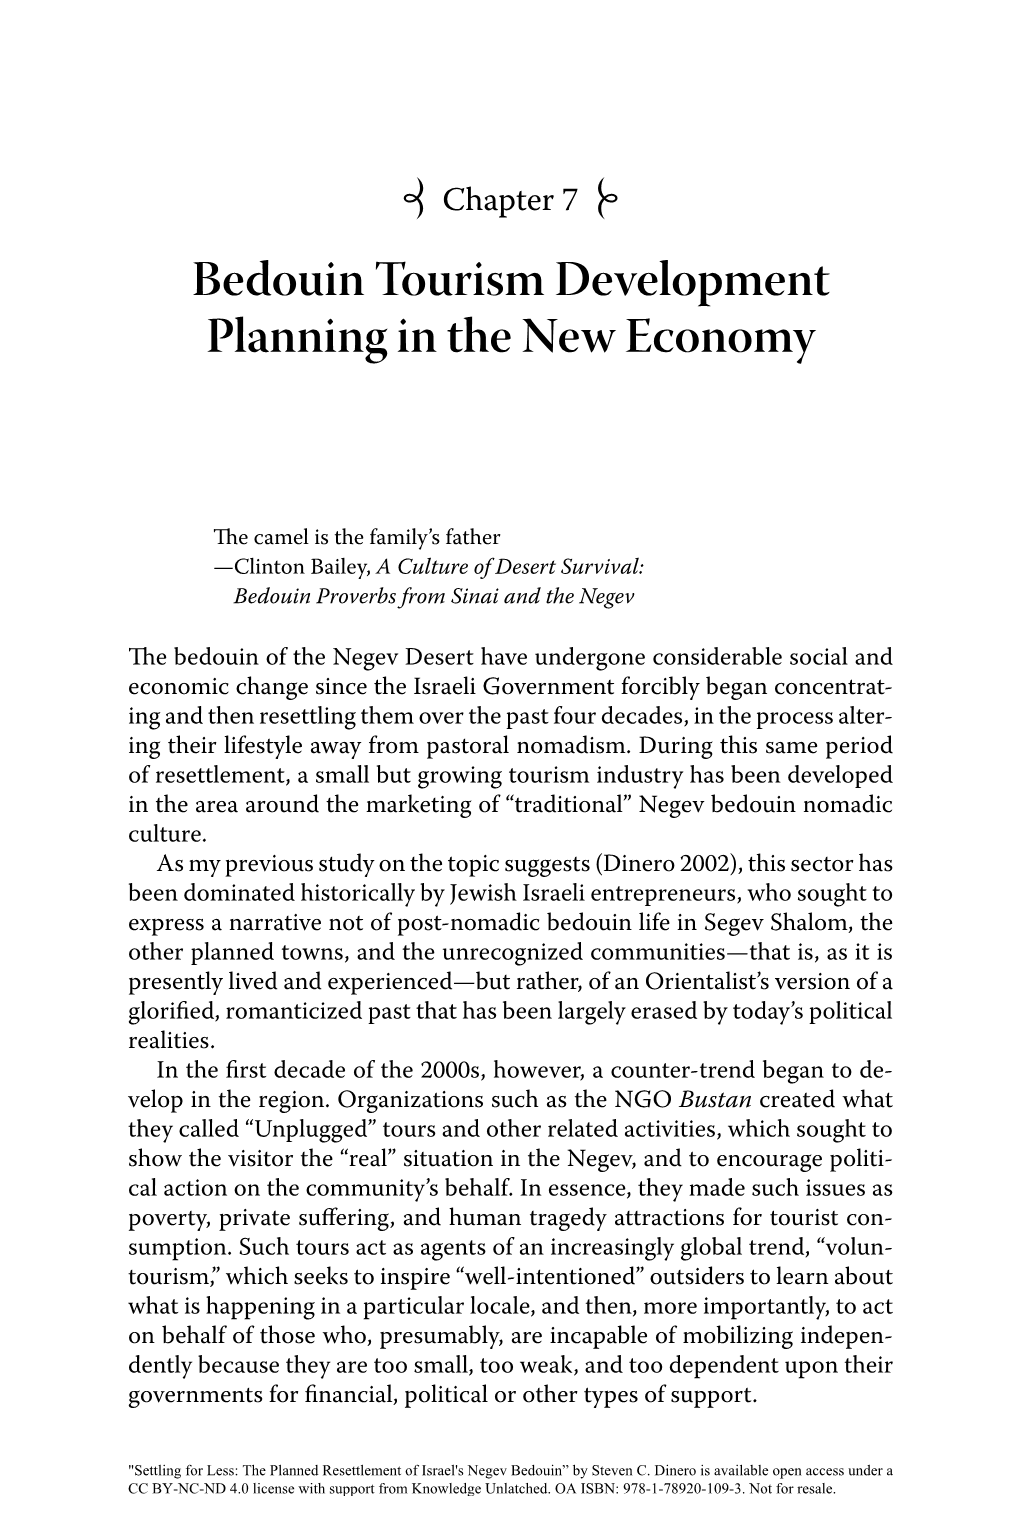 Chapter 7. Bedouin Tourism Development Planning in the New Economy